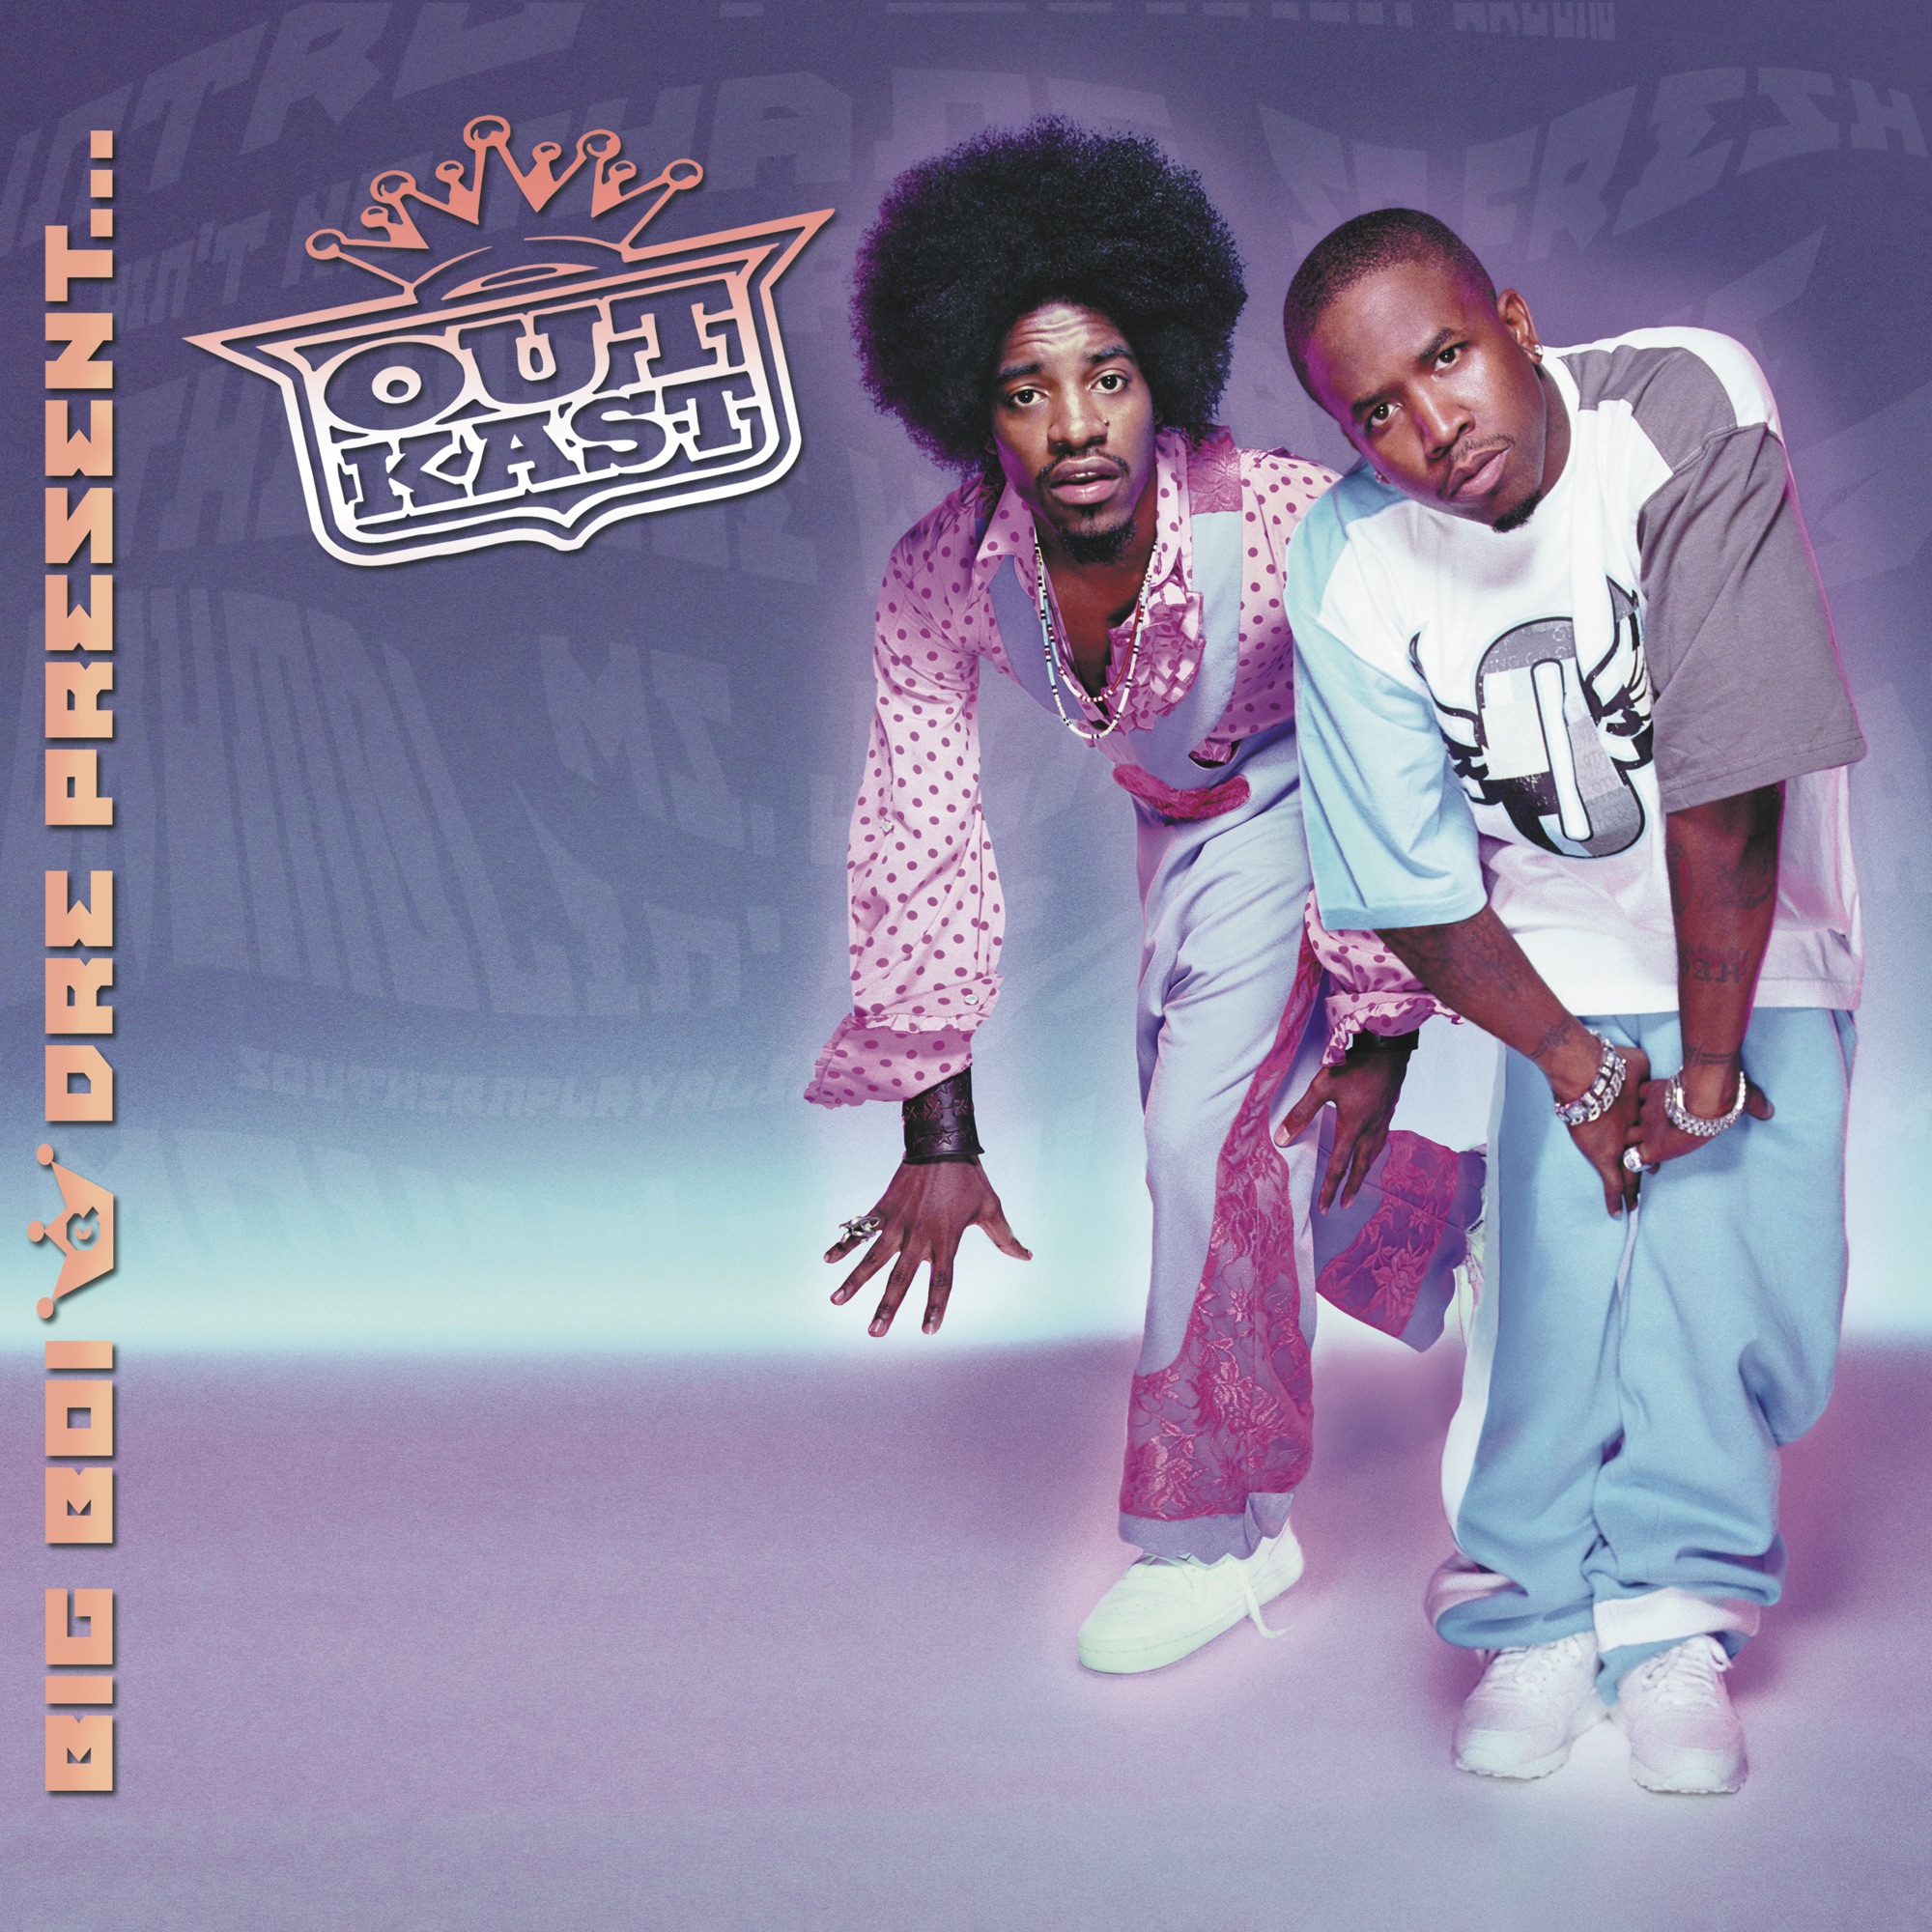 Art for Ms. Jackson (Radio Mix) by Outkast